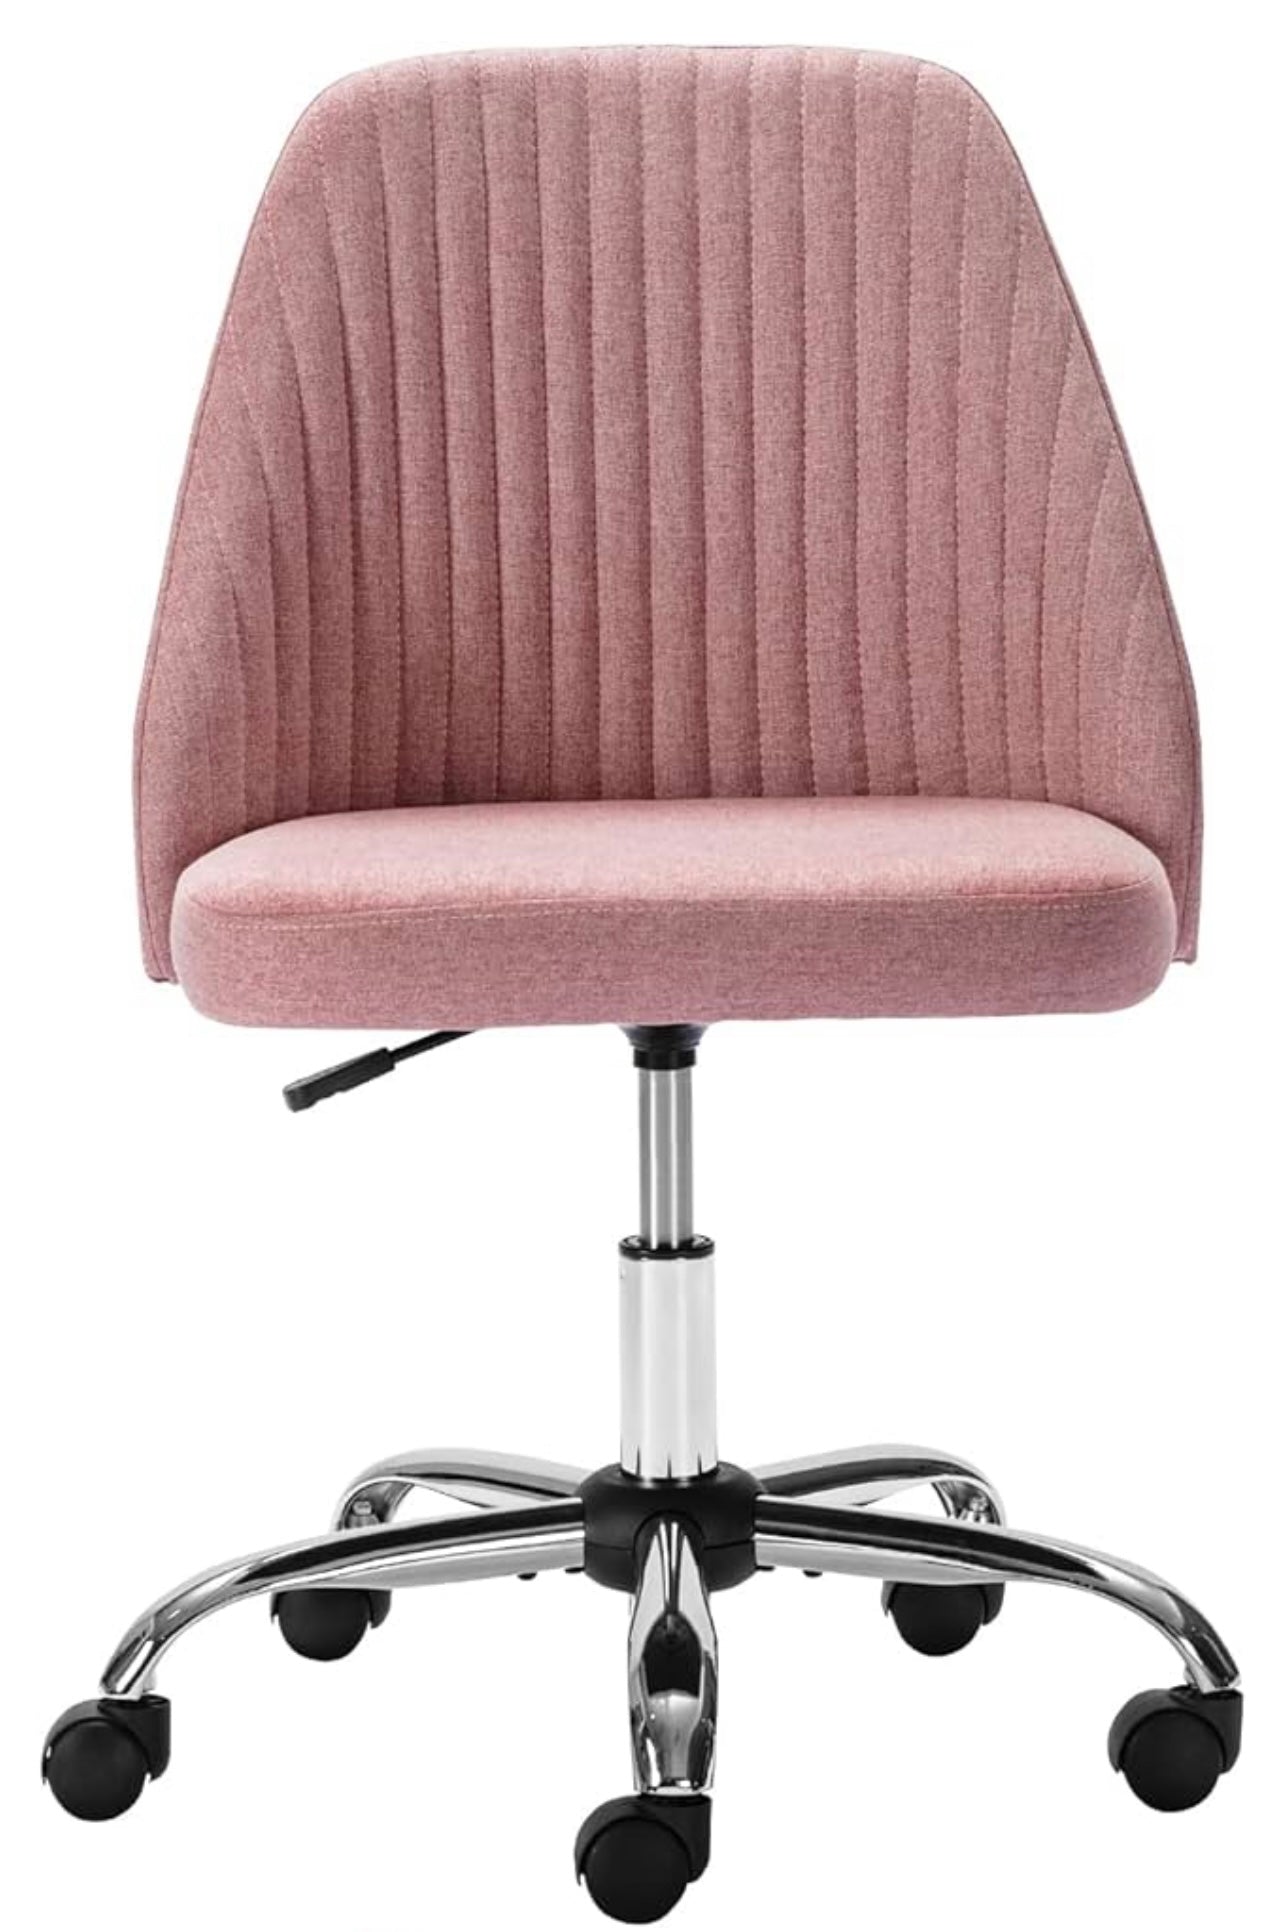 Home Office Chair, Mid-Back Armless Twill Fabric Adjustable Swivel Task Chair for Small Space, Living Room, Make-up, Studying